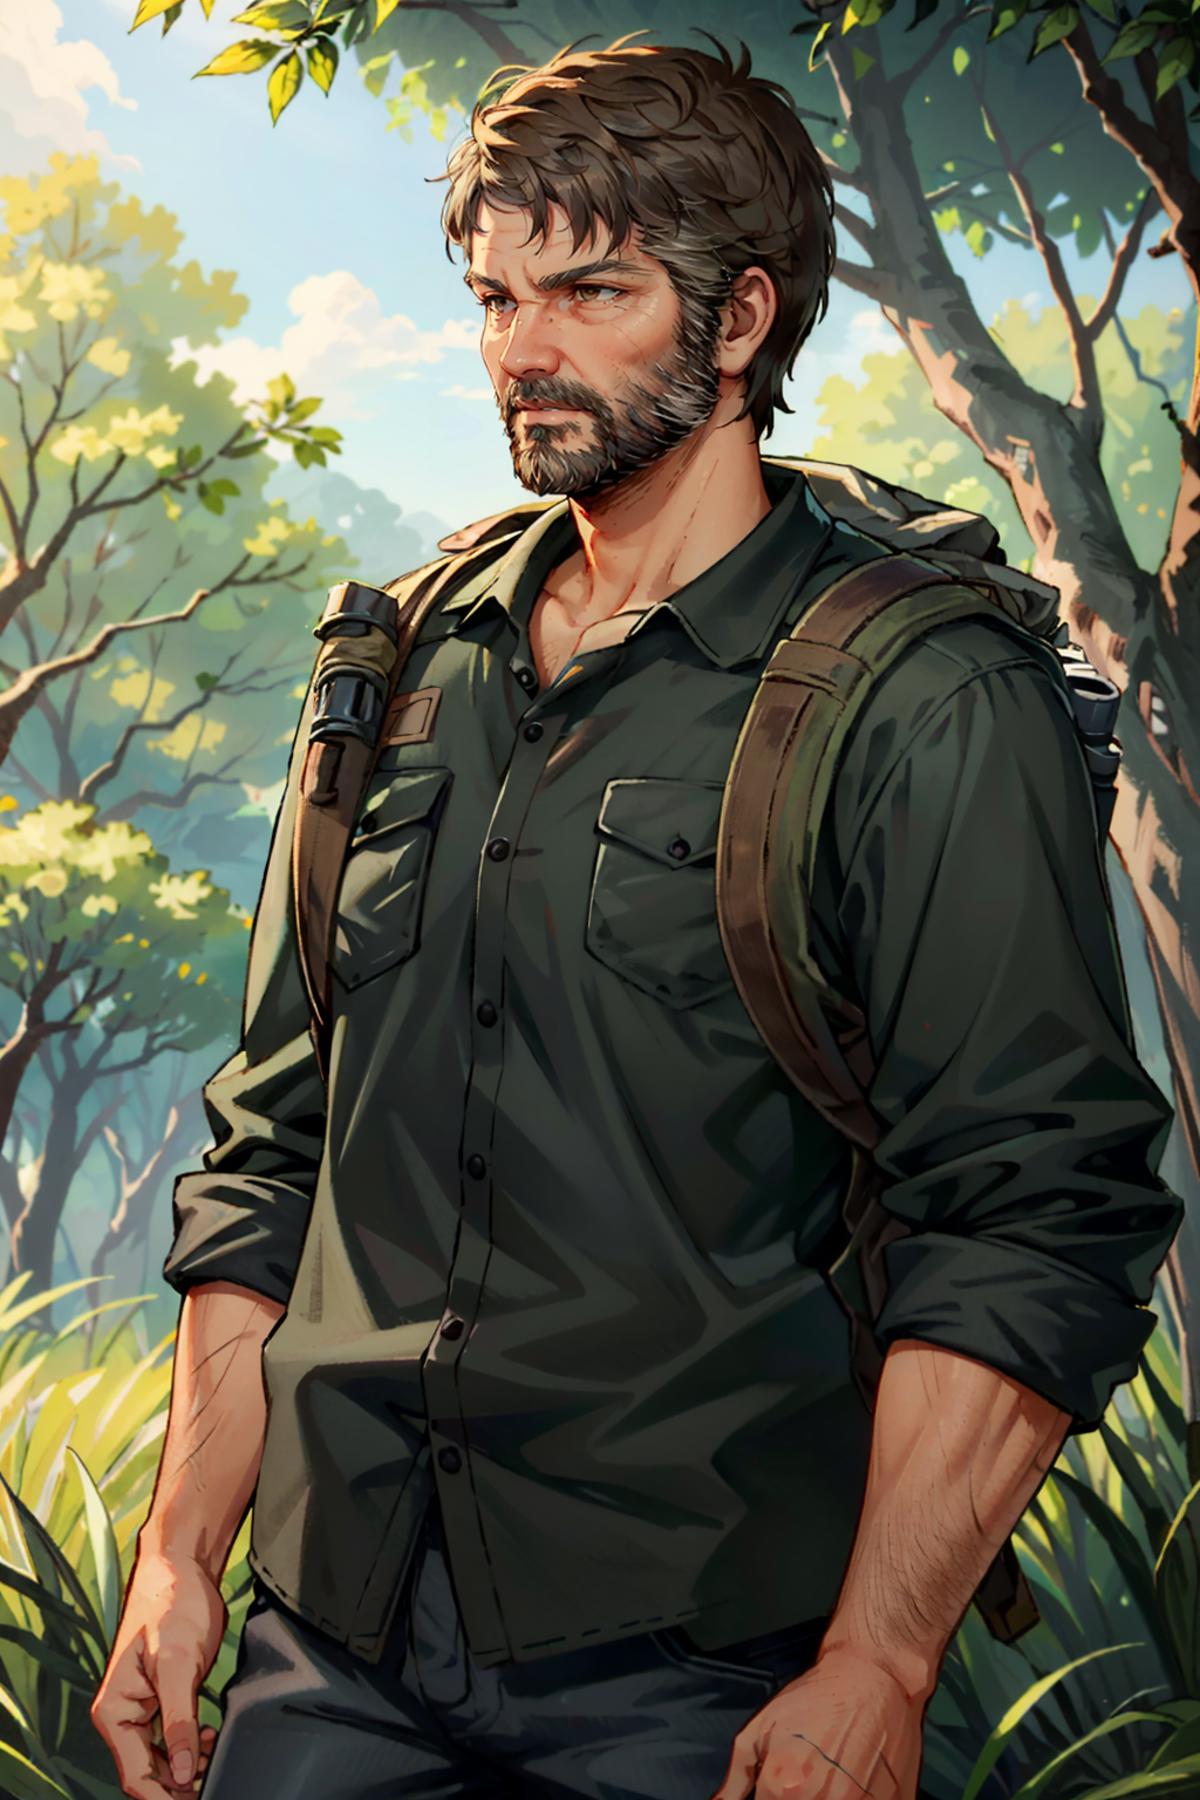 Joel from The Last of Us image by BloodRedKittie